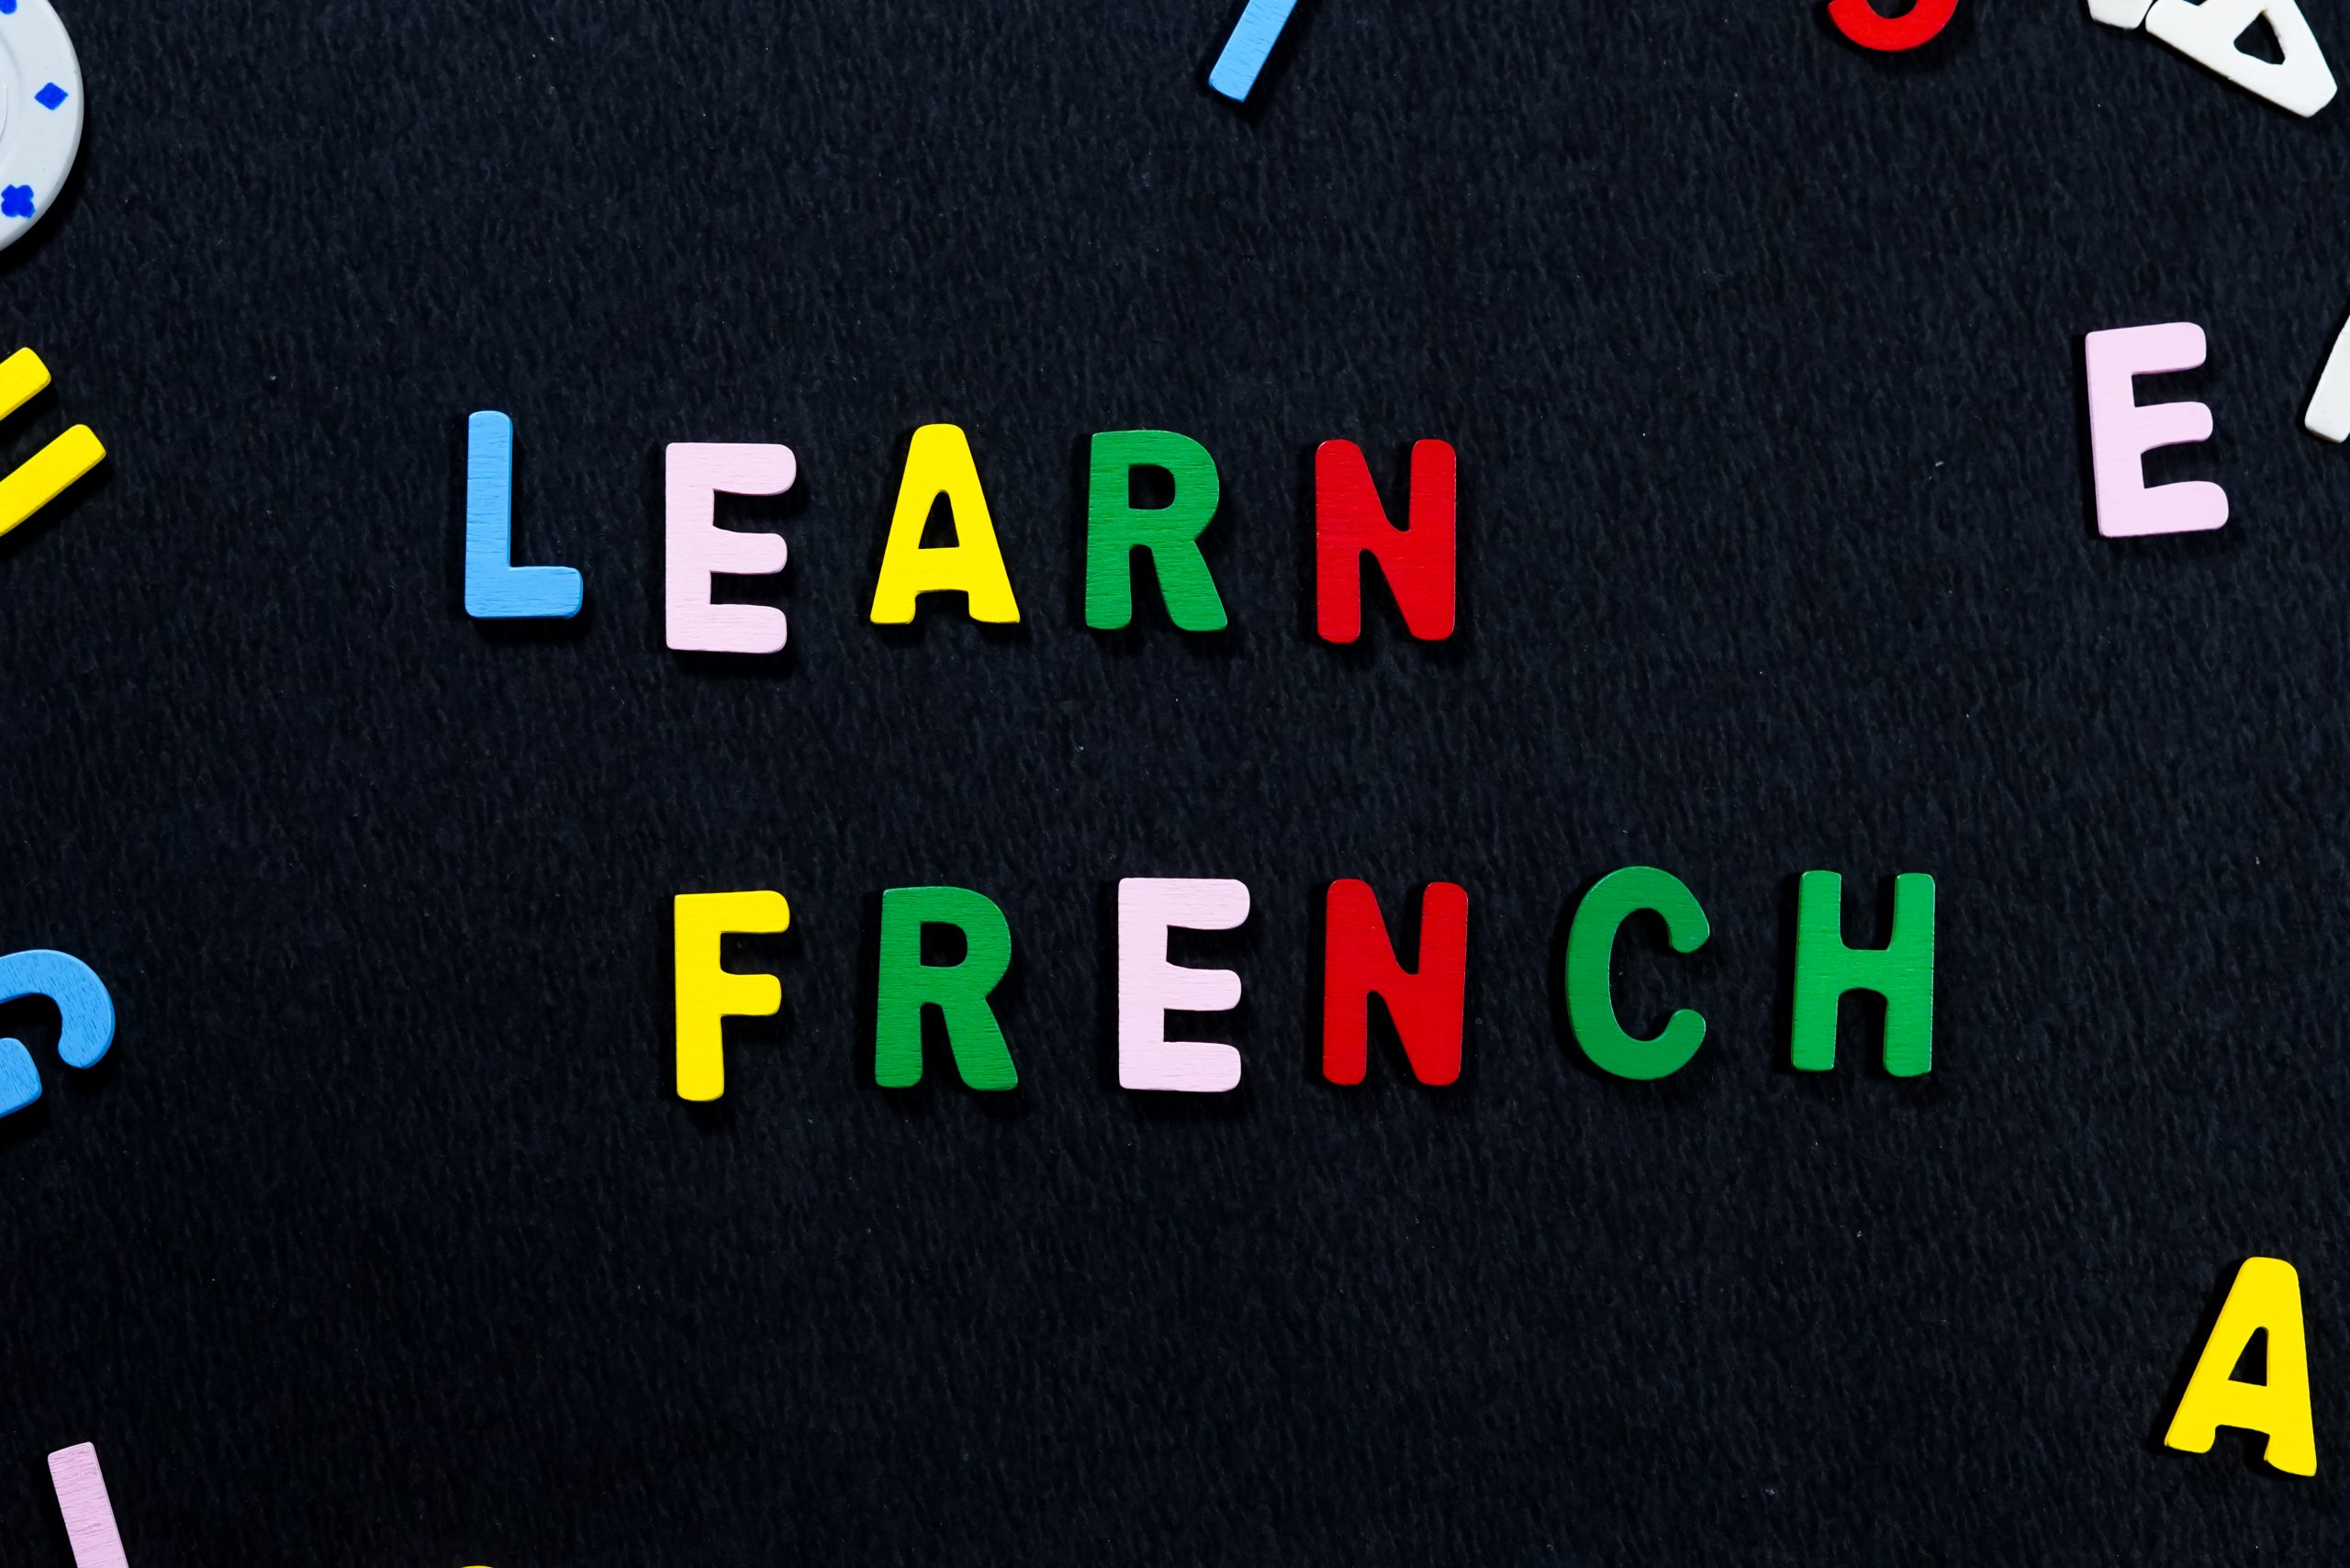 An advertisement for learning French